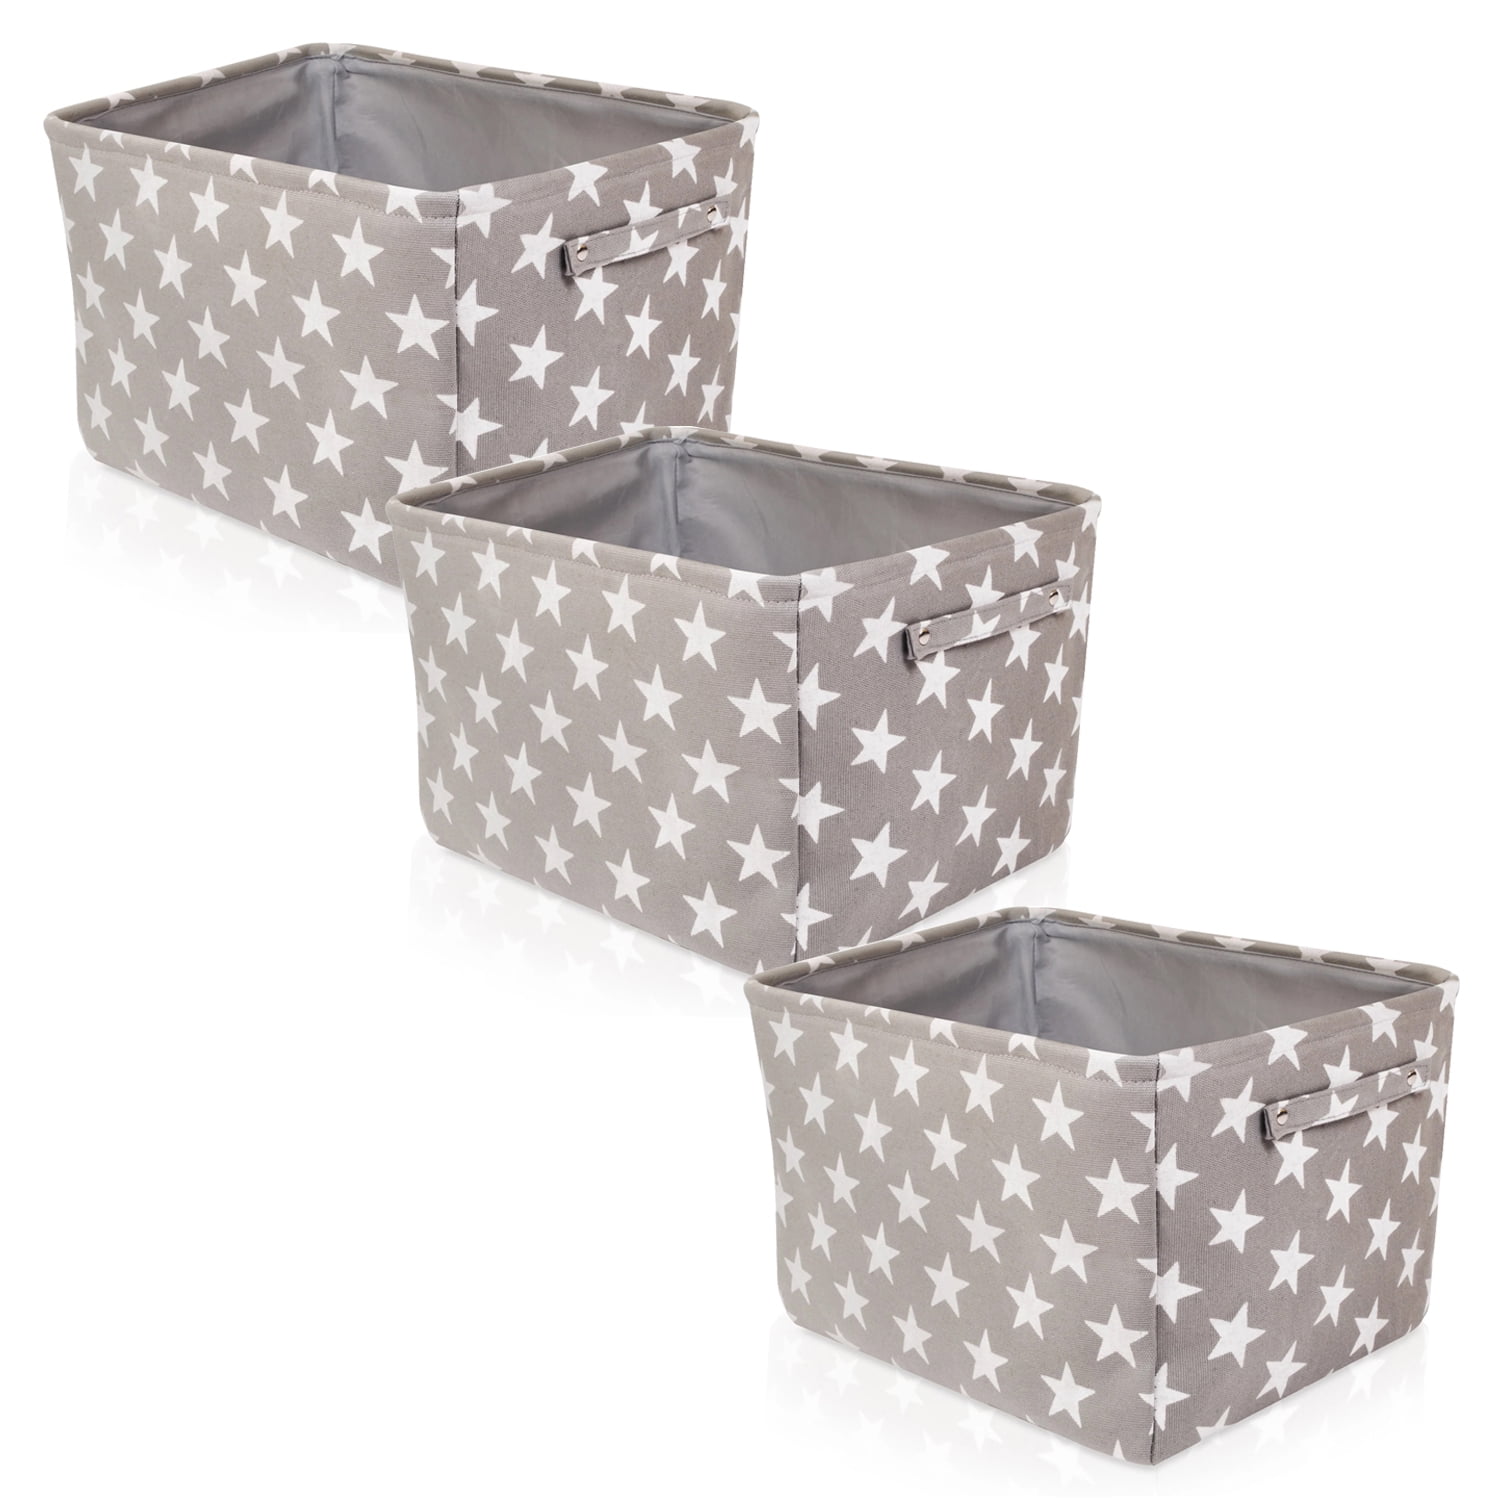 4 Pack Plastic Storage Baskets with Handles, Small Bathroom Organizing Bins  for Shelves and Laundry, 4 Colors, 11.5x5x5 inches